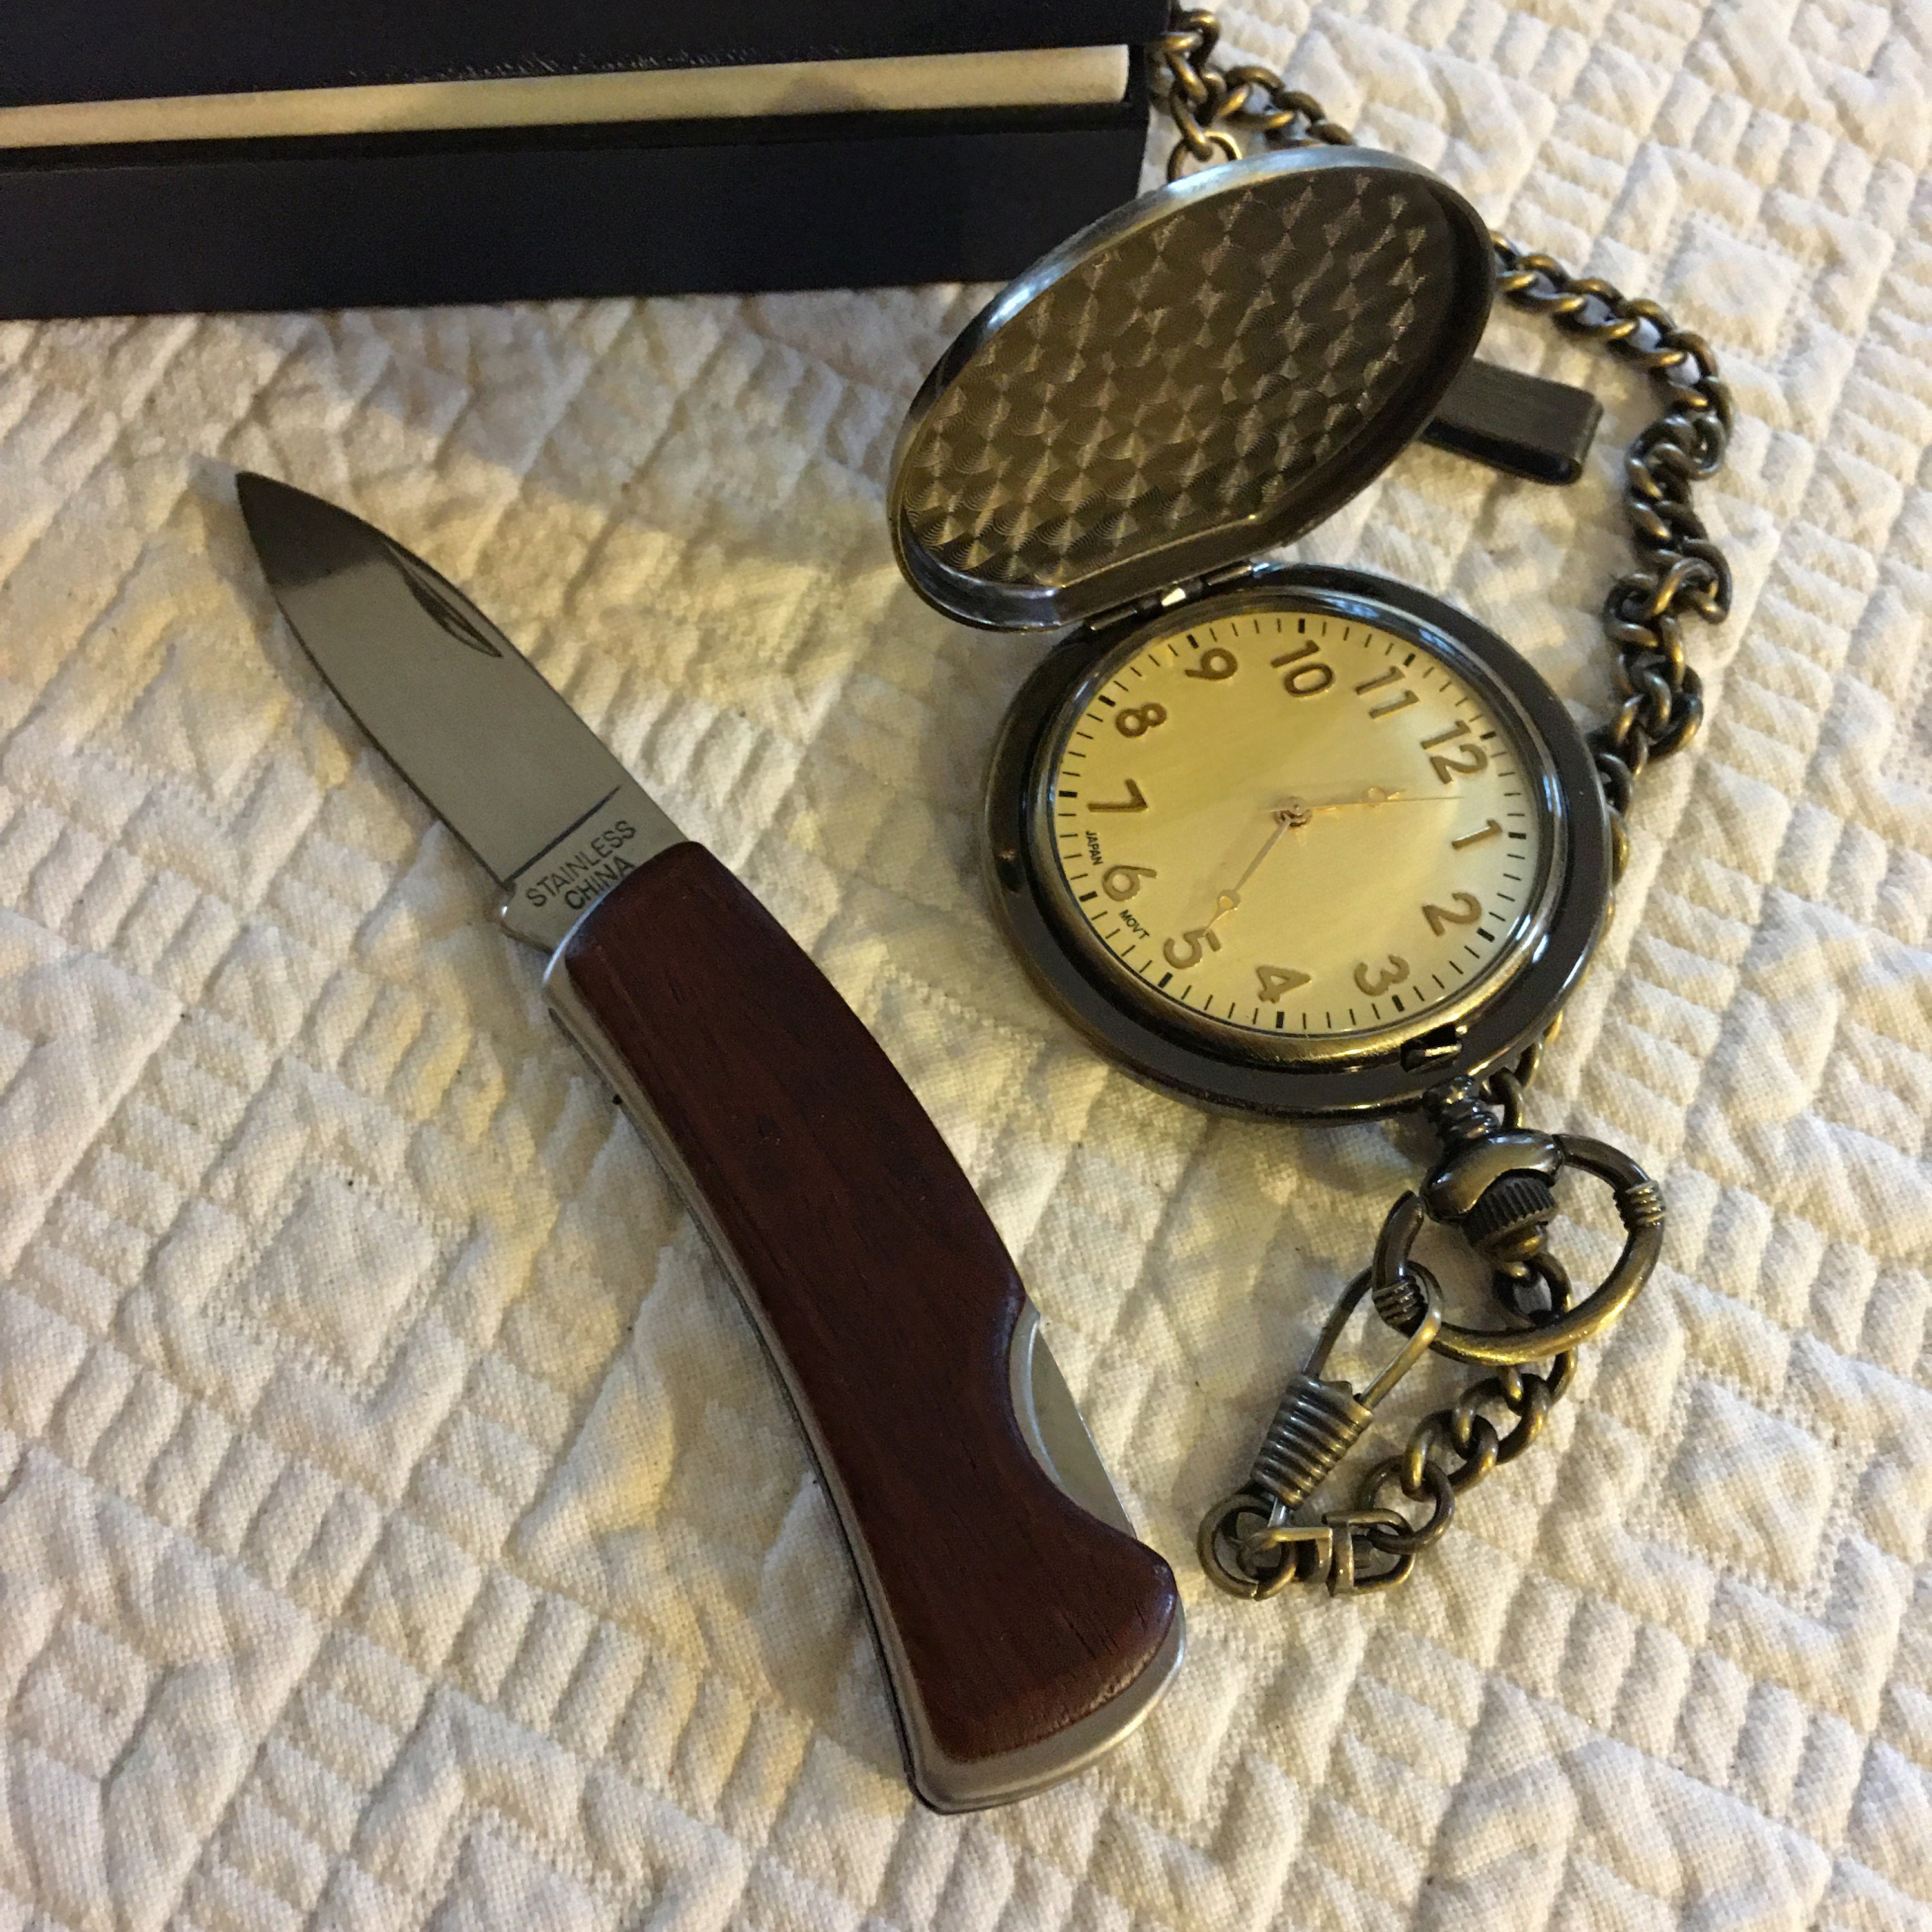 Antique and Vintage Collectibles - Knives, Jewelry, Watches